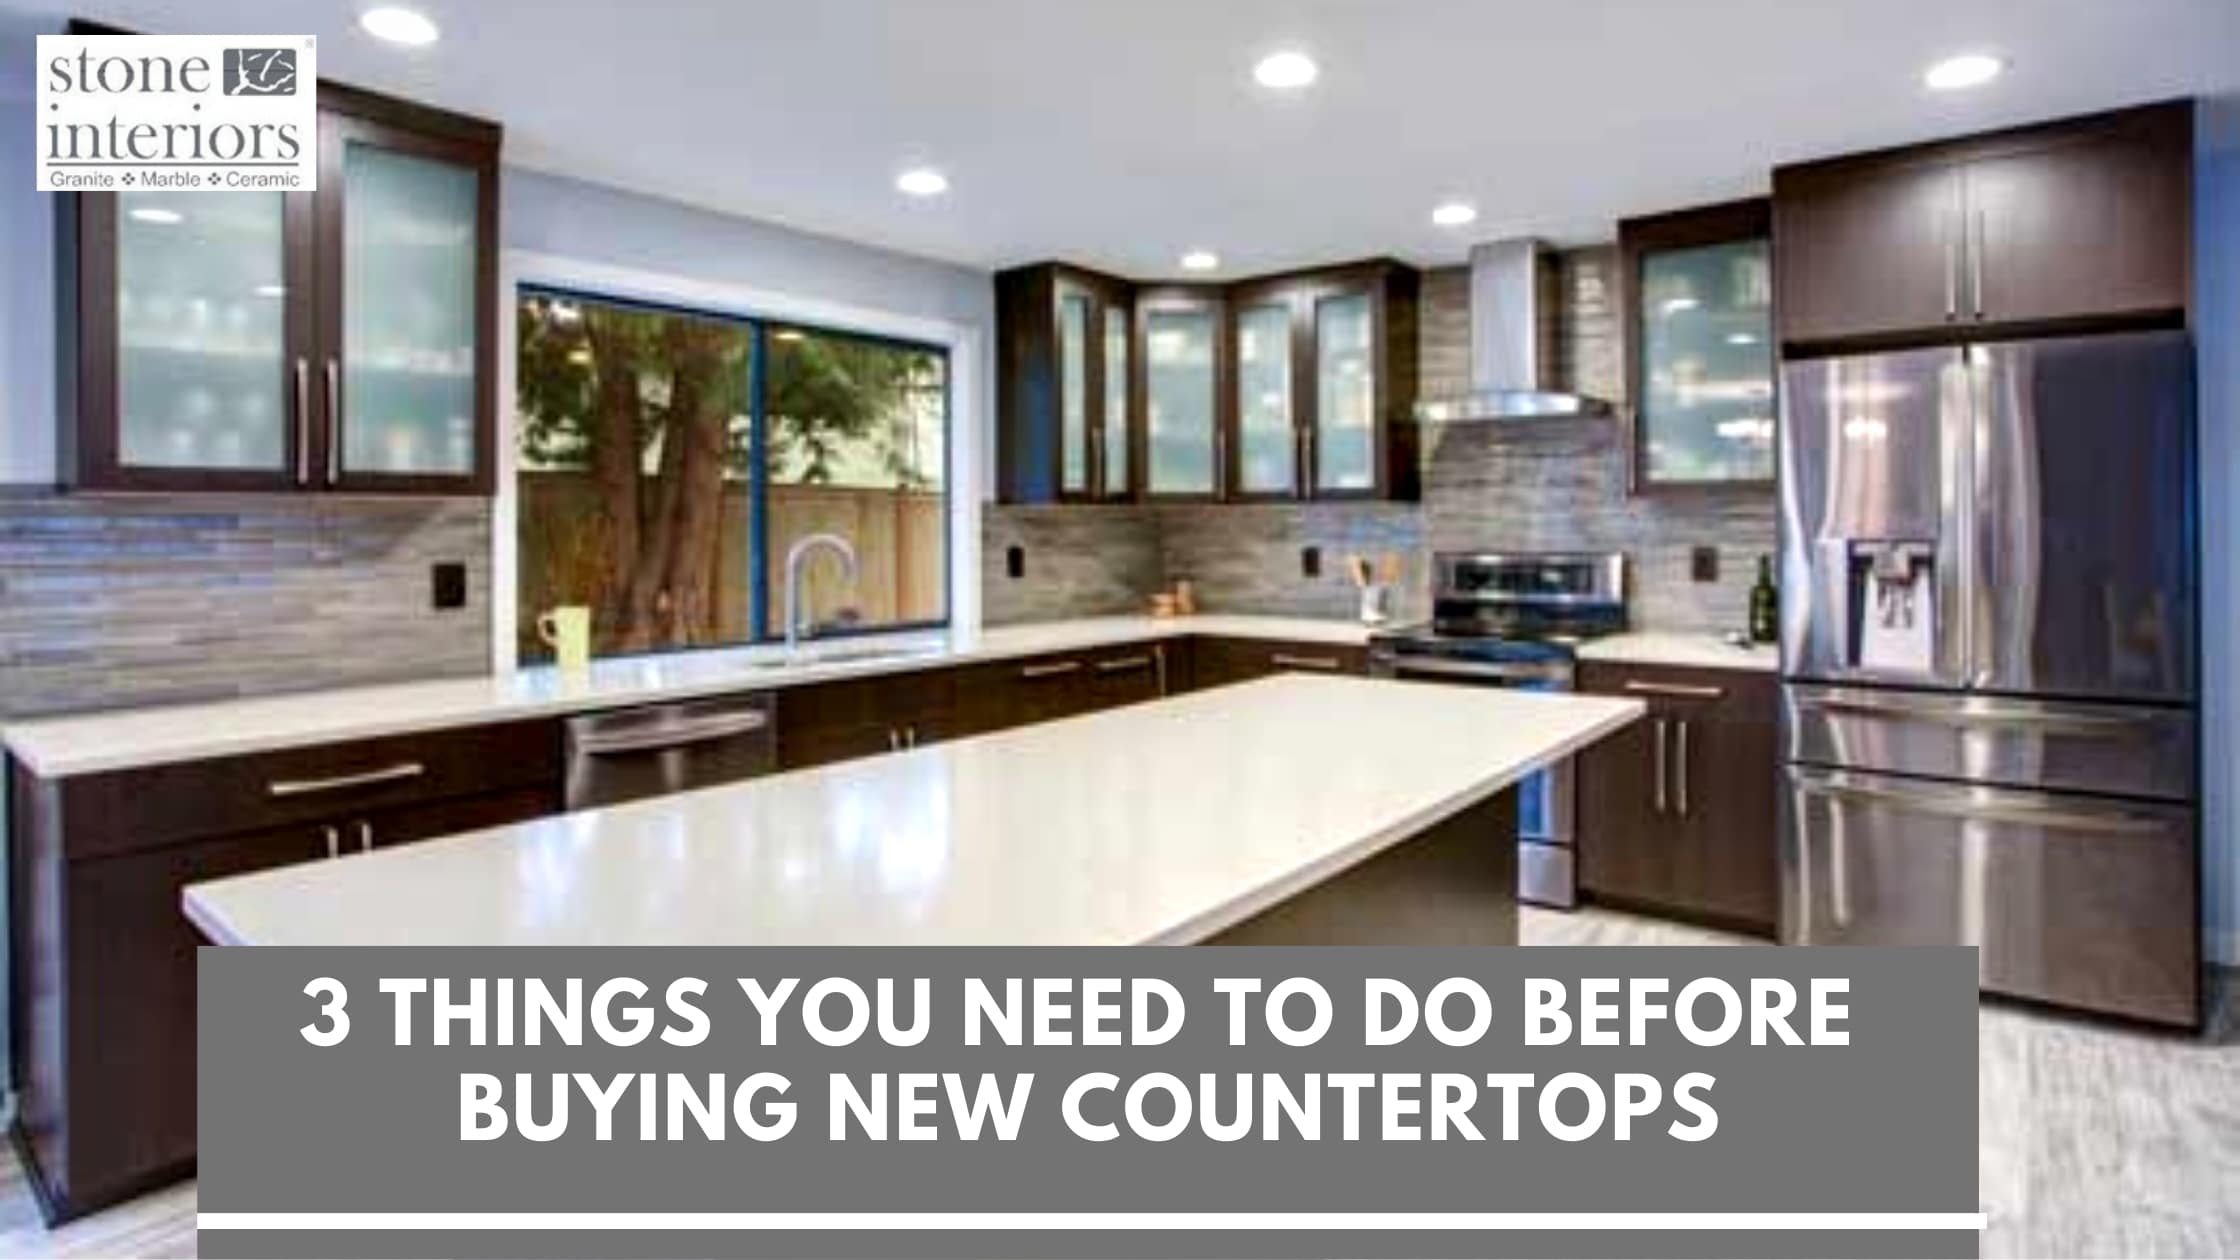 3 Things You Need To Do Before Buying New Countertops - Stone Interiors